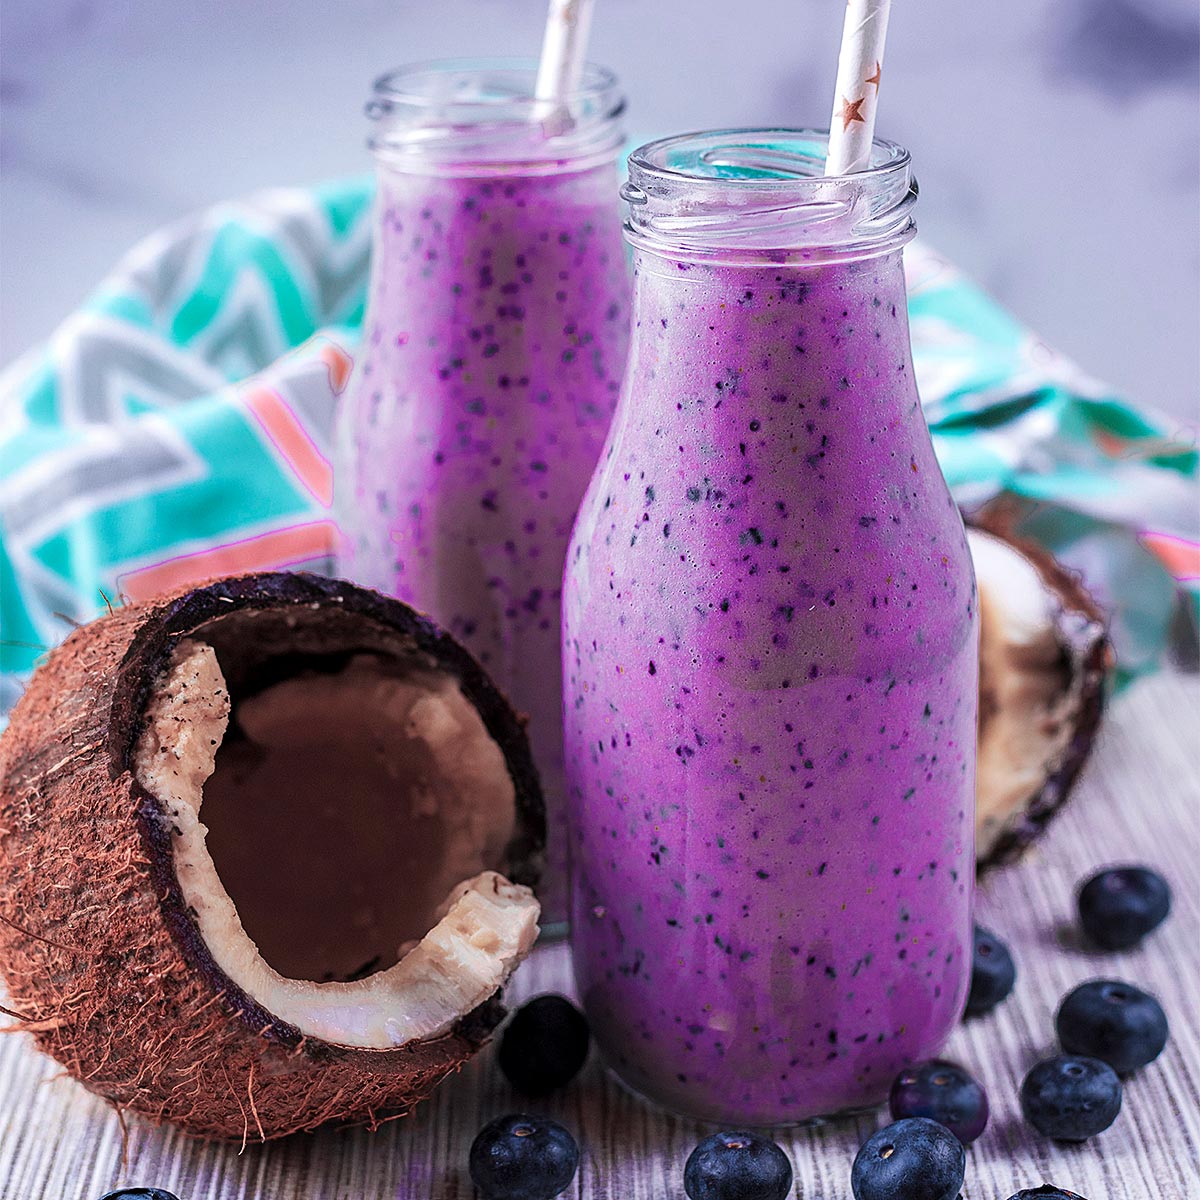 https://hungryhealthyhappy.com/wp-content/uploads/2017/03/Blueberry-and-Coconut-Smoothie-featured-b.jpg